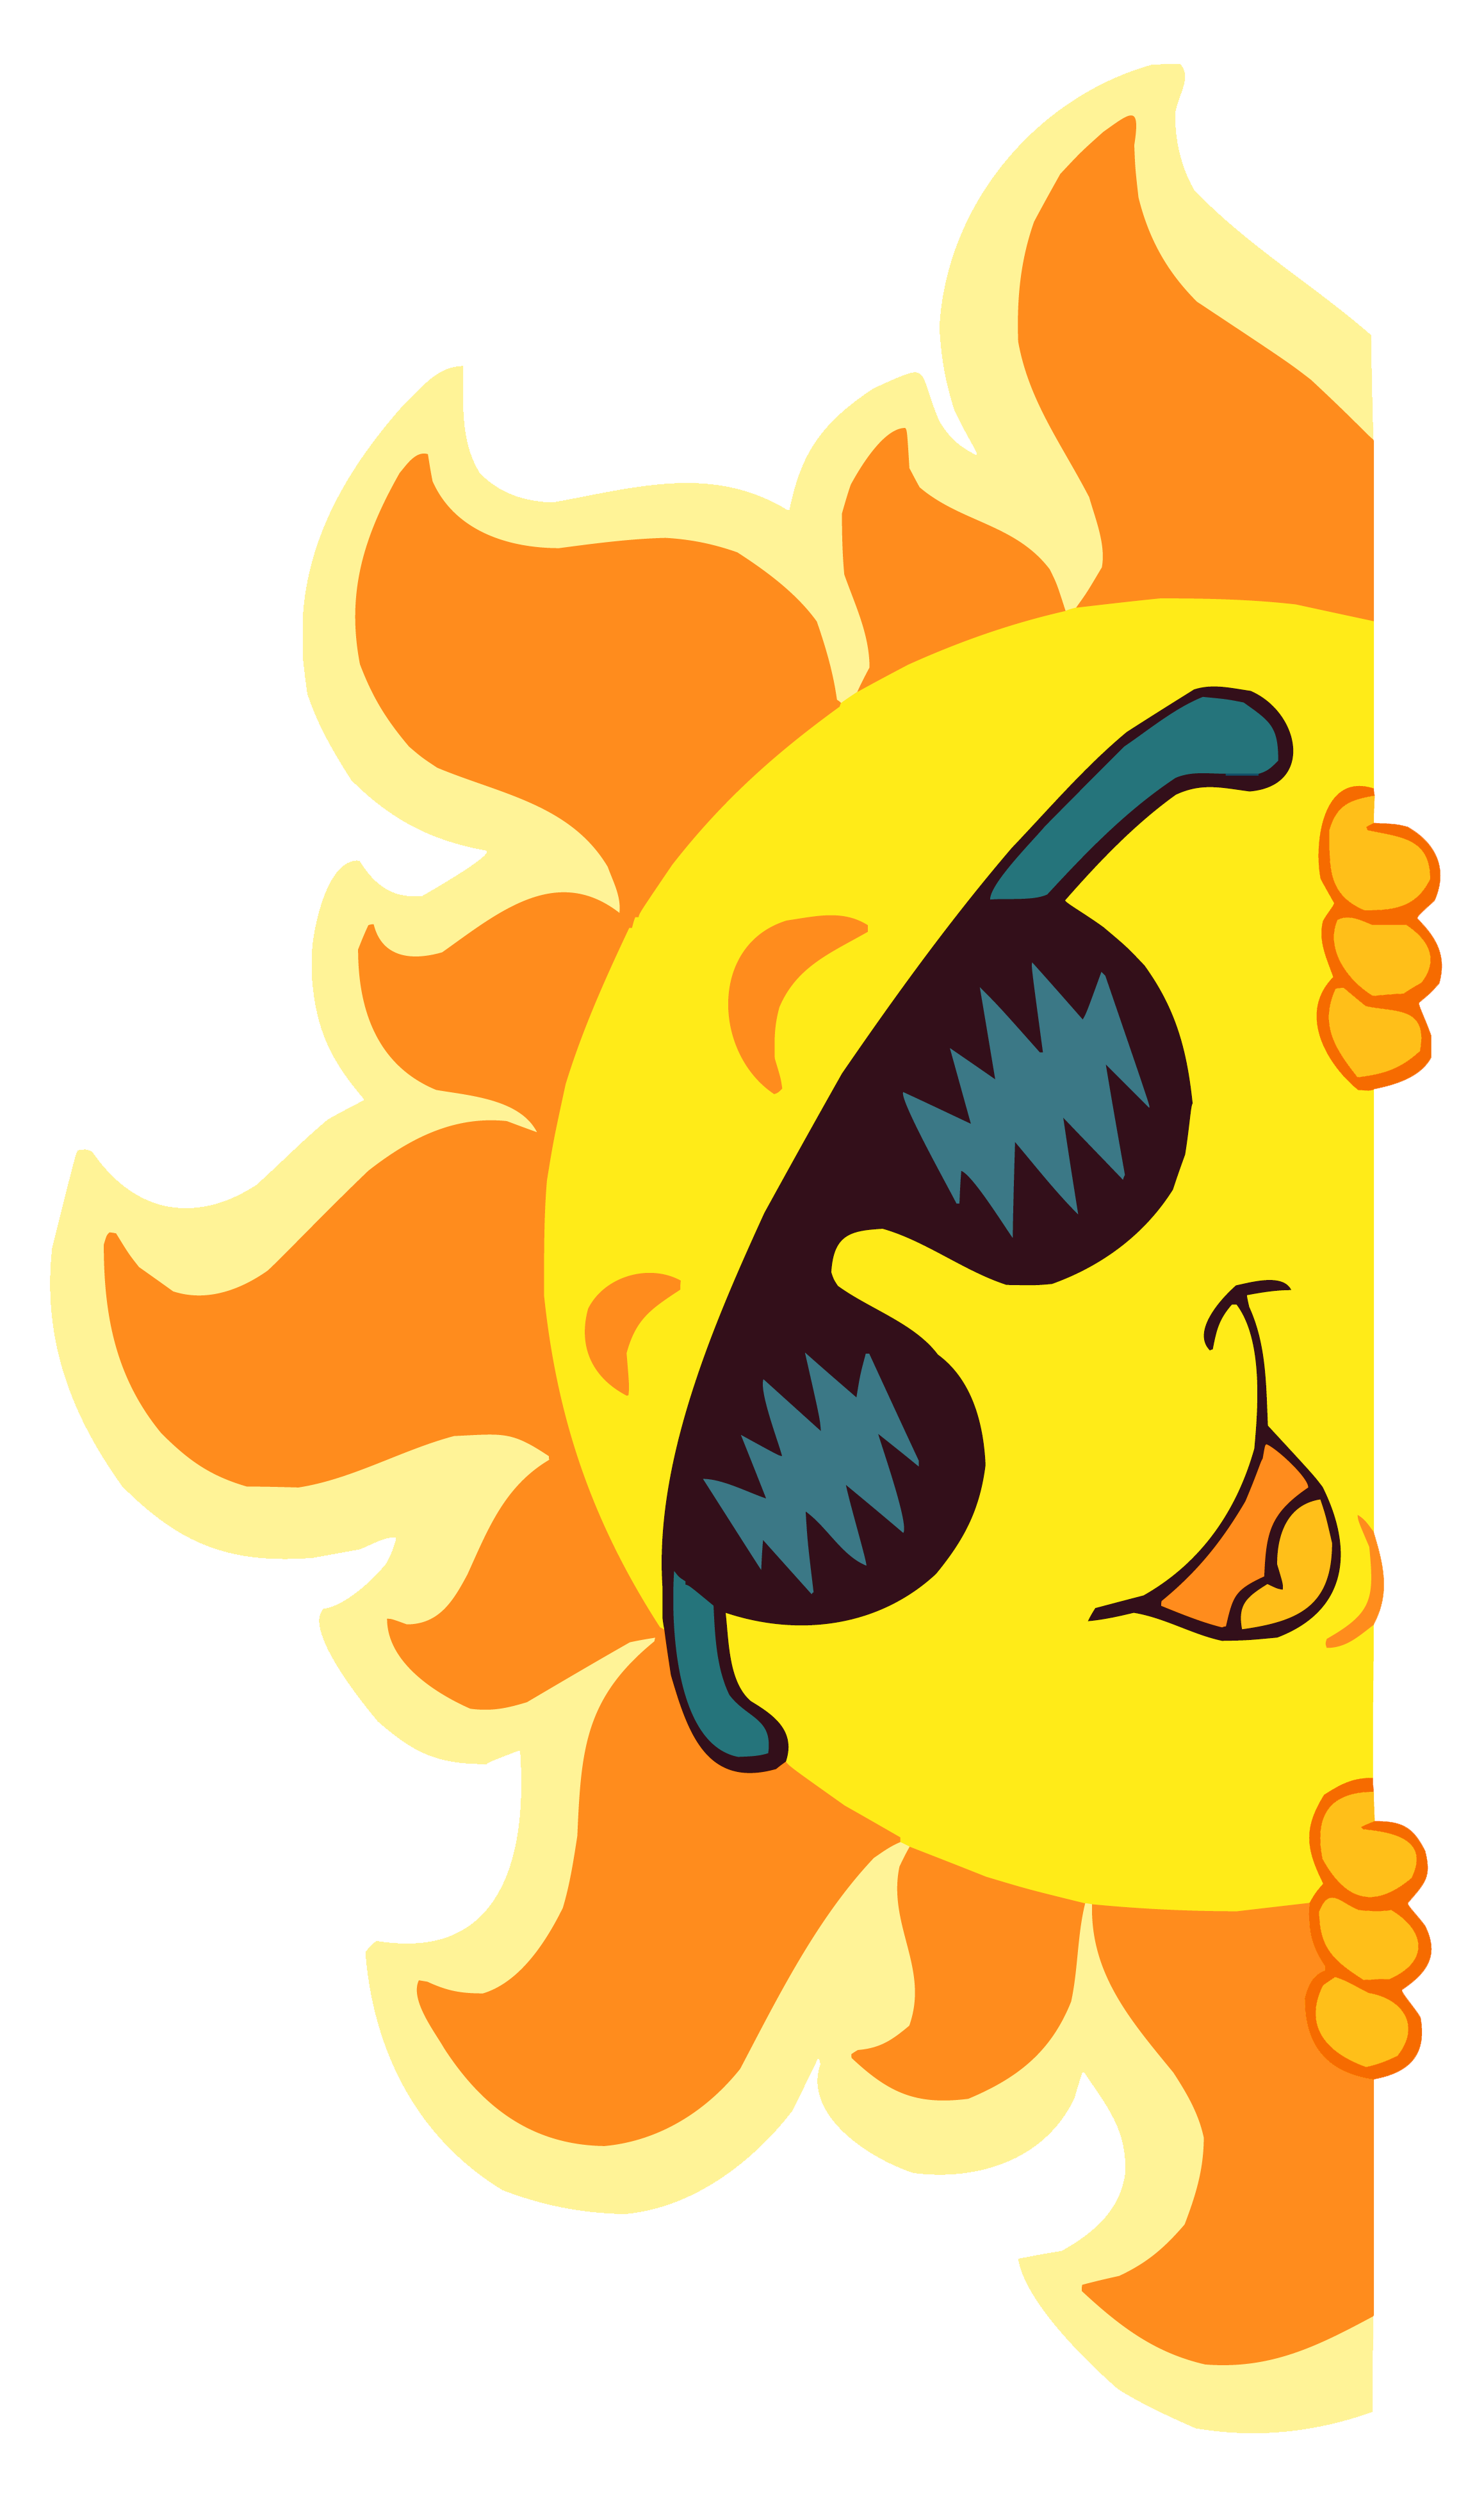 Kidney clipart angry. Transparent smiling sun decoration